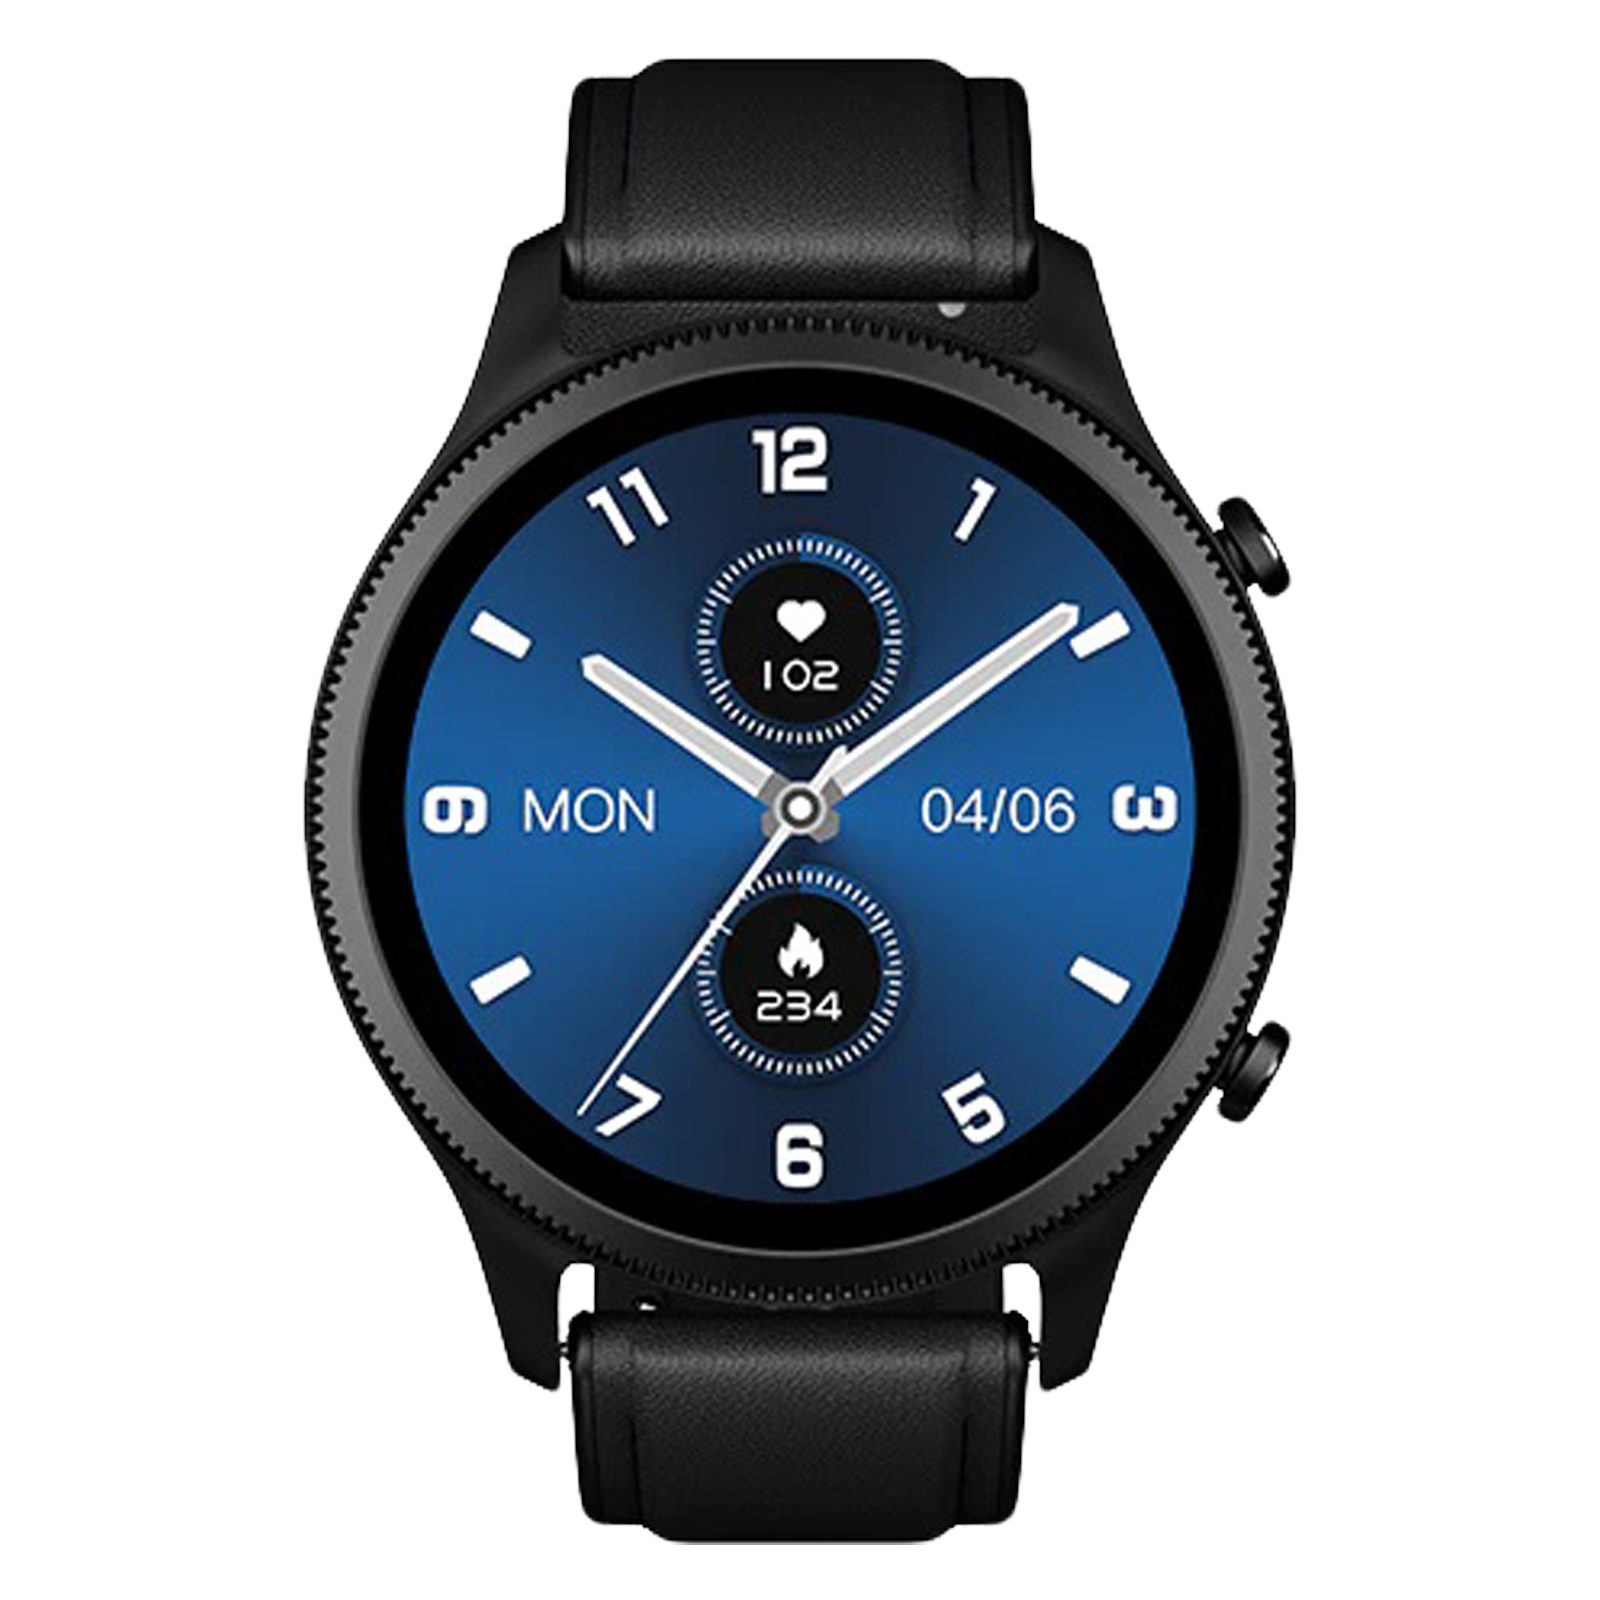 Noise NoiseFit Halo Smartwatch with Bluetooth Calling (36mm AMOLED Display, IP68 Water Resistant, Classic Black Strap)_1